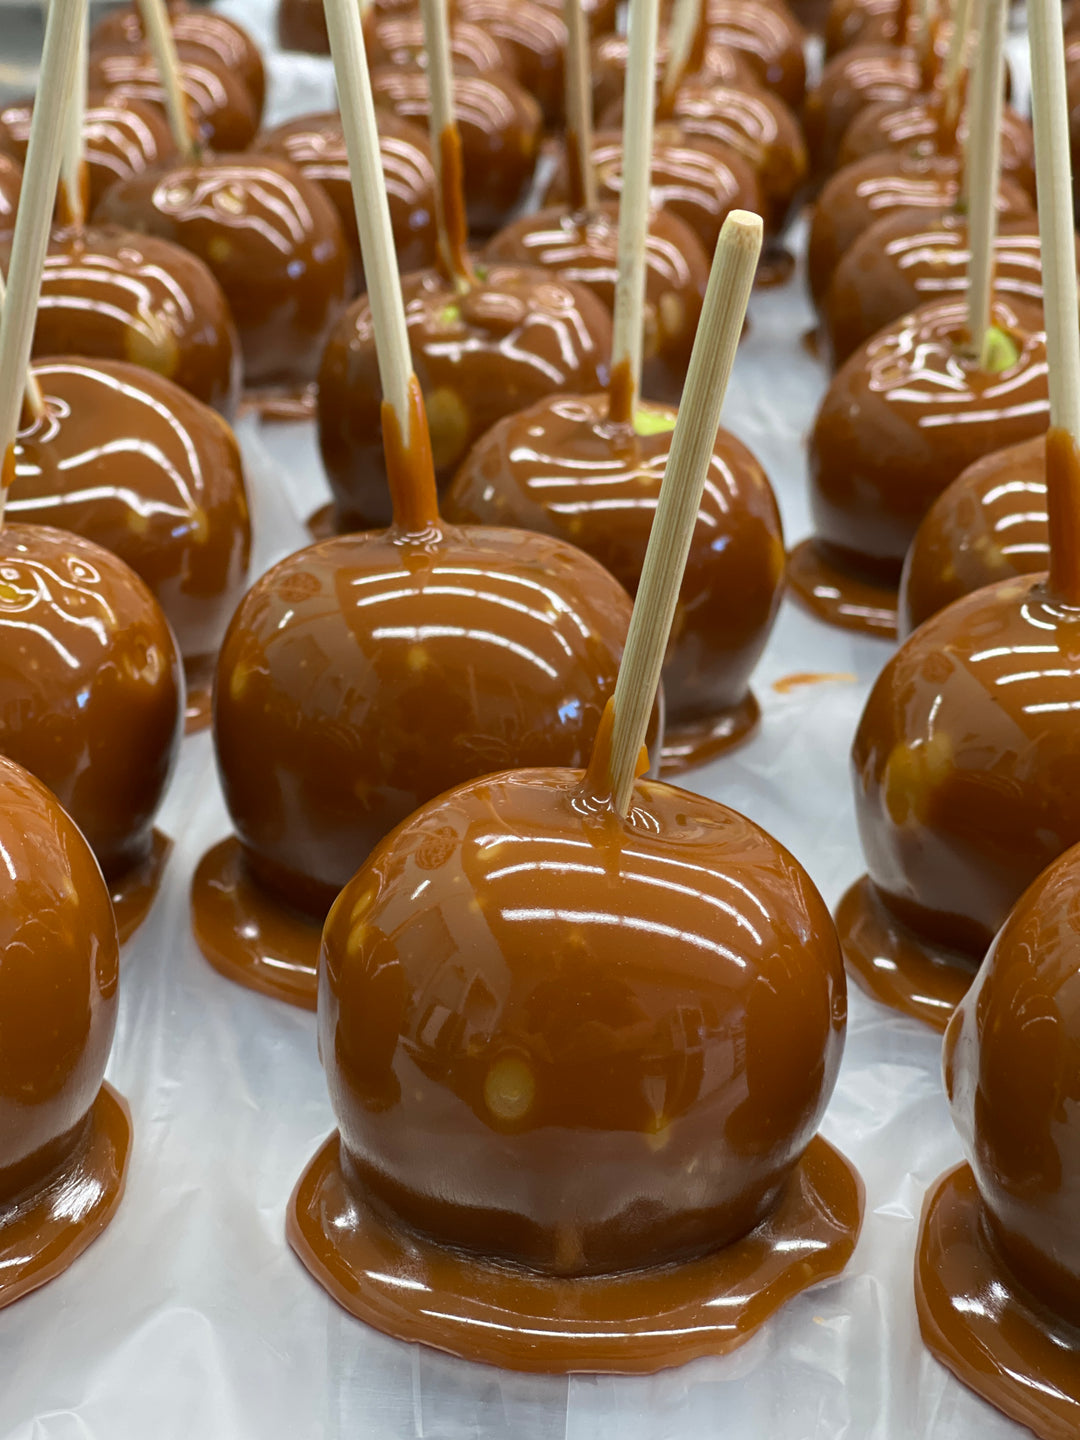 Double-Dipped Caramel Apples available for a limited time